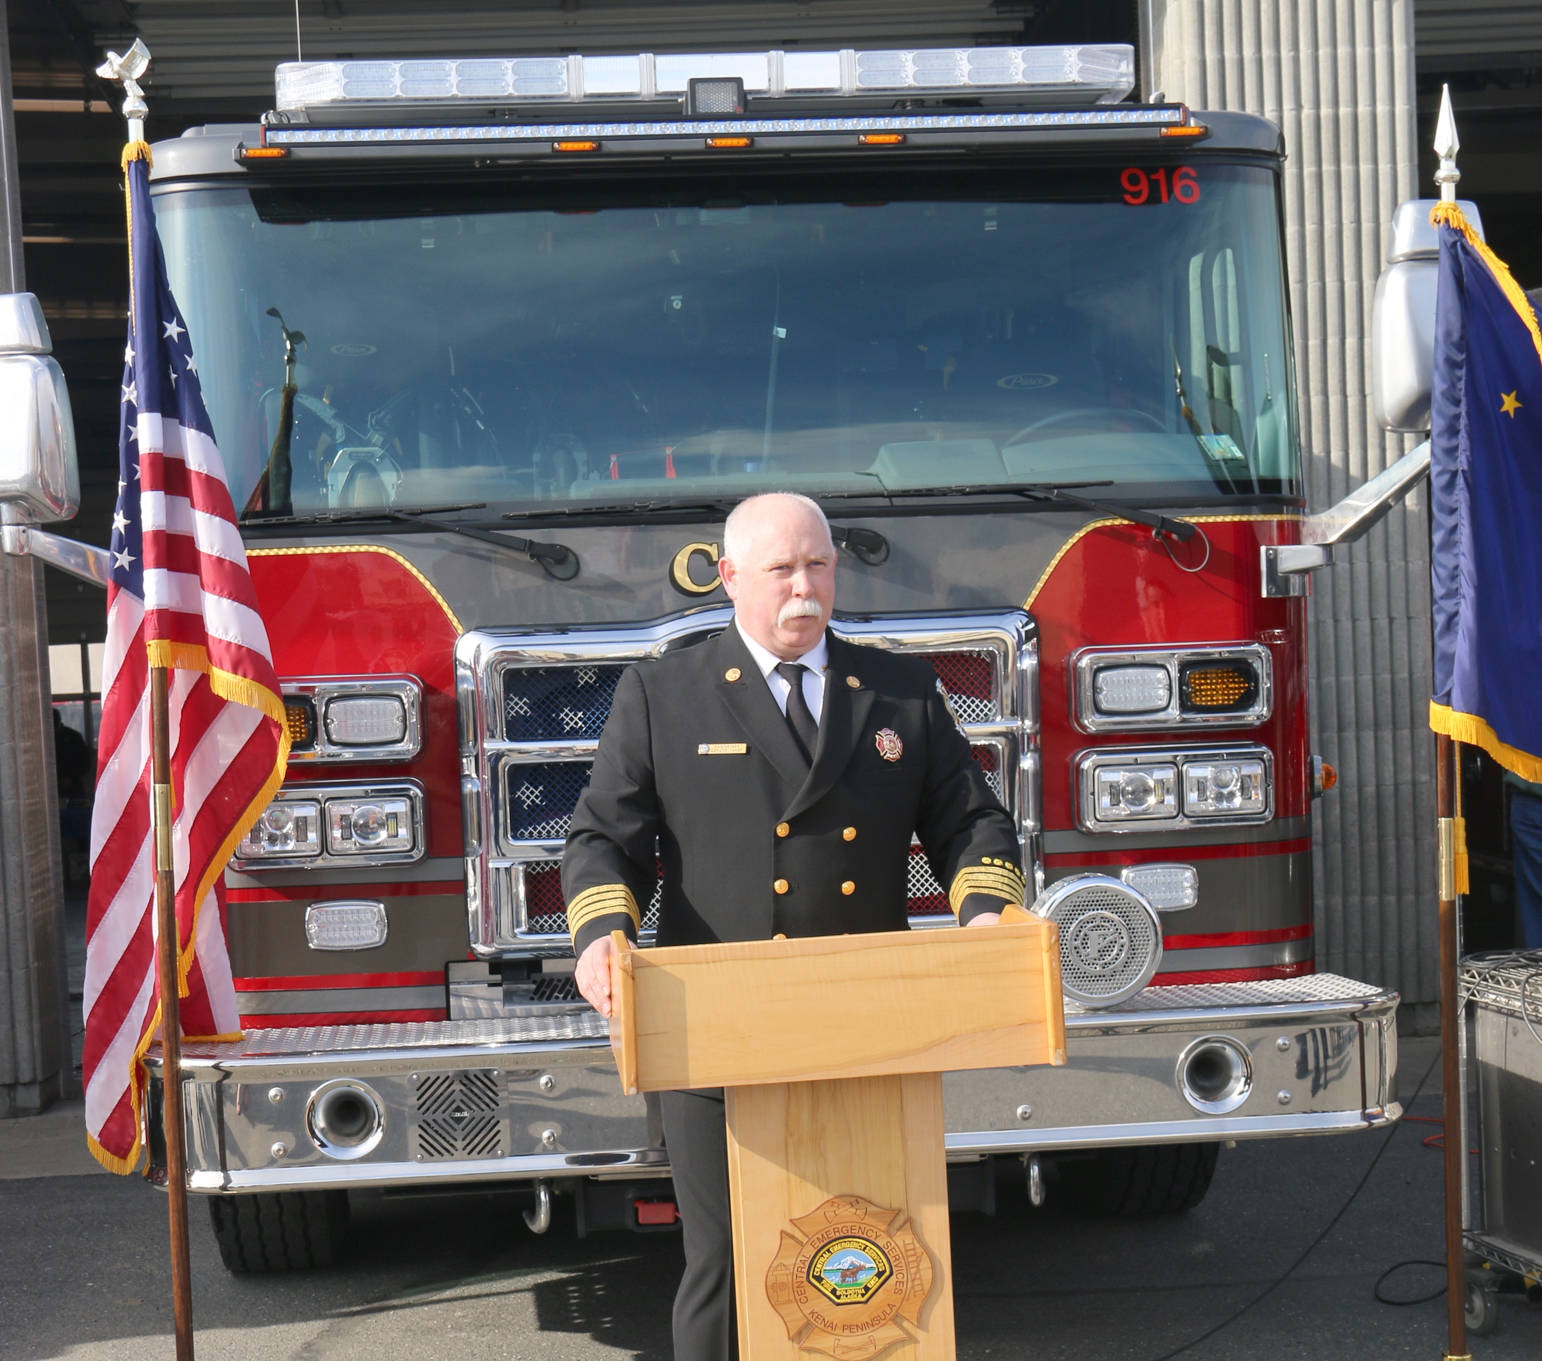 Deputy Chief Dan Grimes welcomes the community to dedication ceremony.